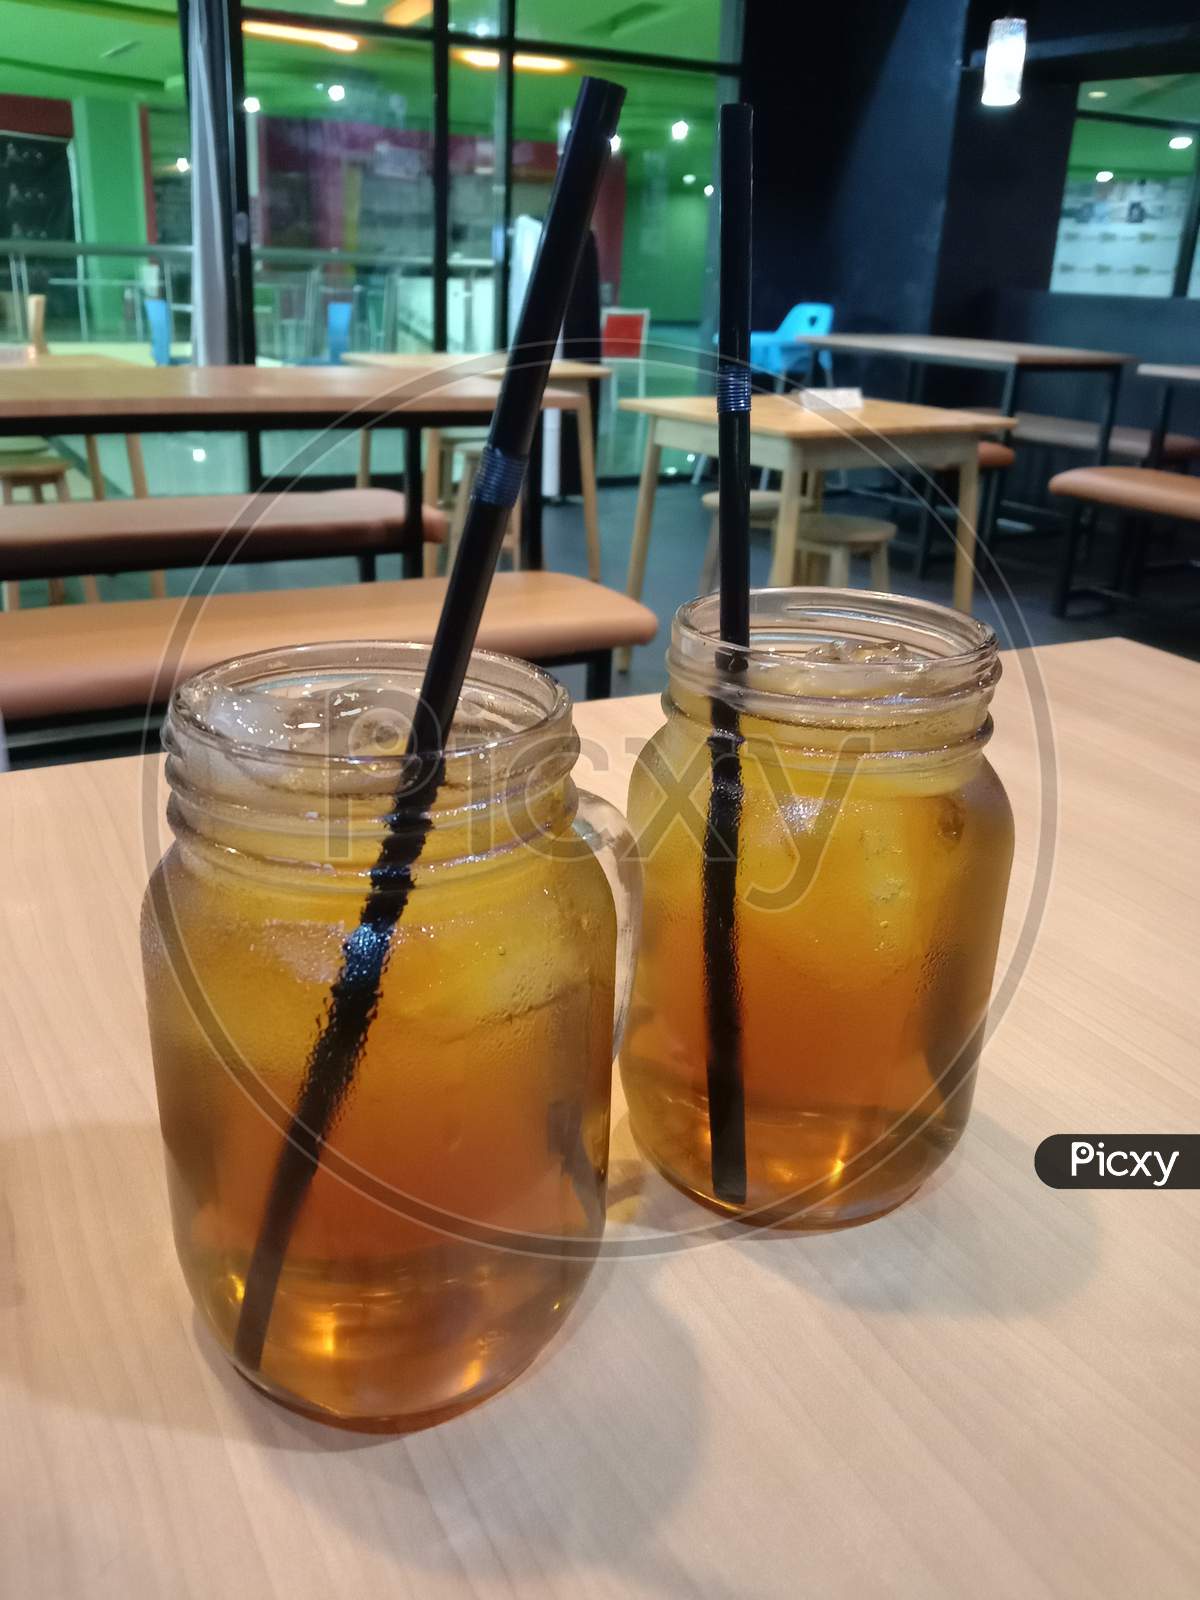 Ice tea and table